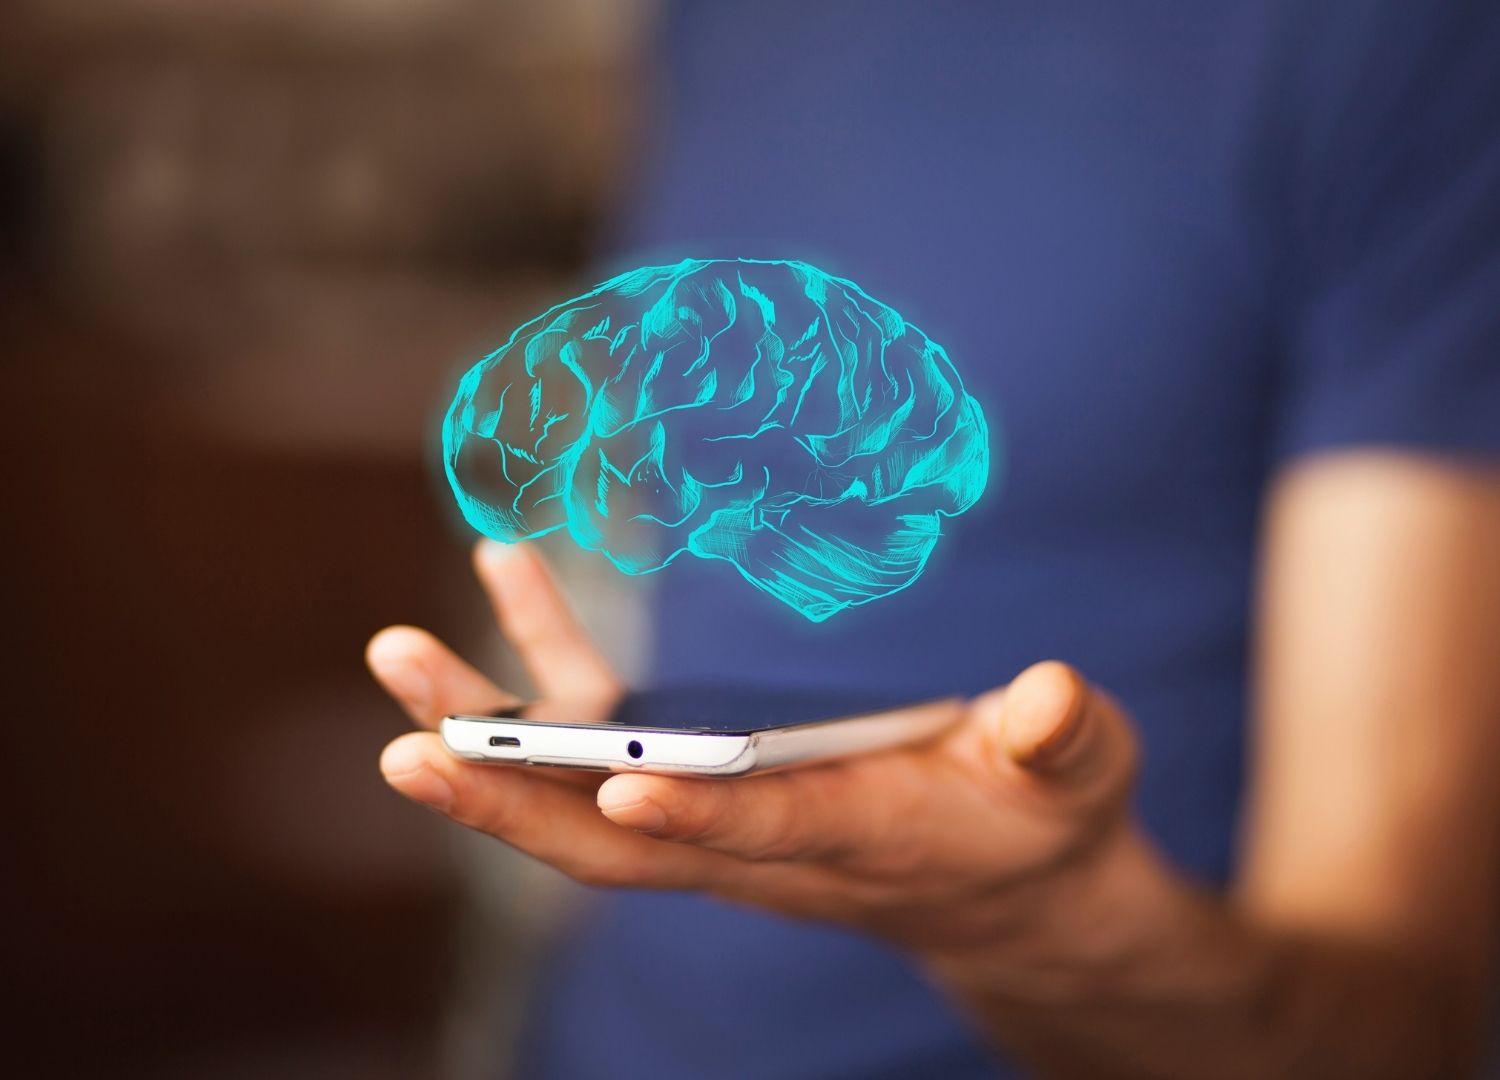 Does Your Phone Light Really Cause Brain Cancer?